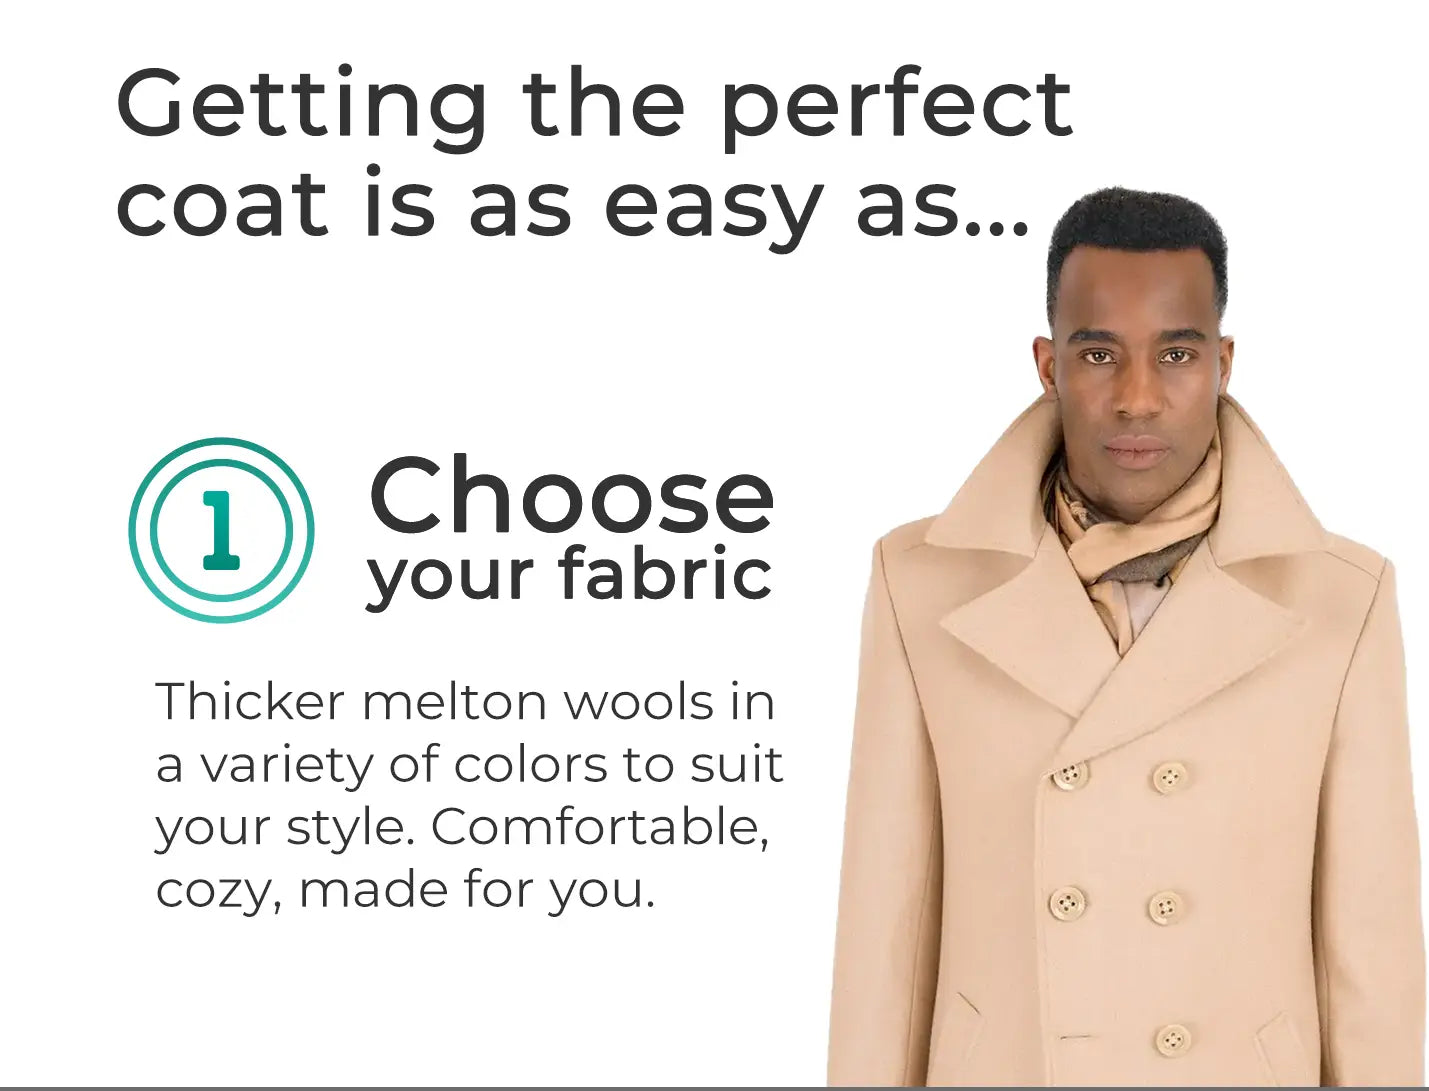 Get the perfect coat in three steps... choose your fabric. Thicker melton wools in a variety of colors to suit your style. Comfortable, cozy, made for you. Man in camel peacoat.